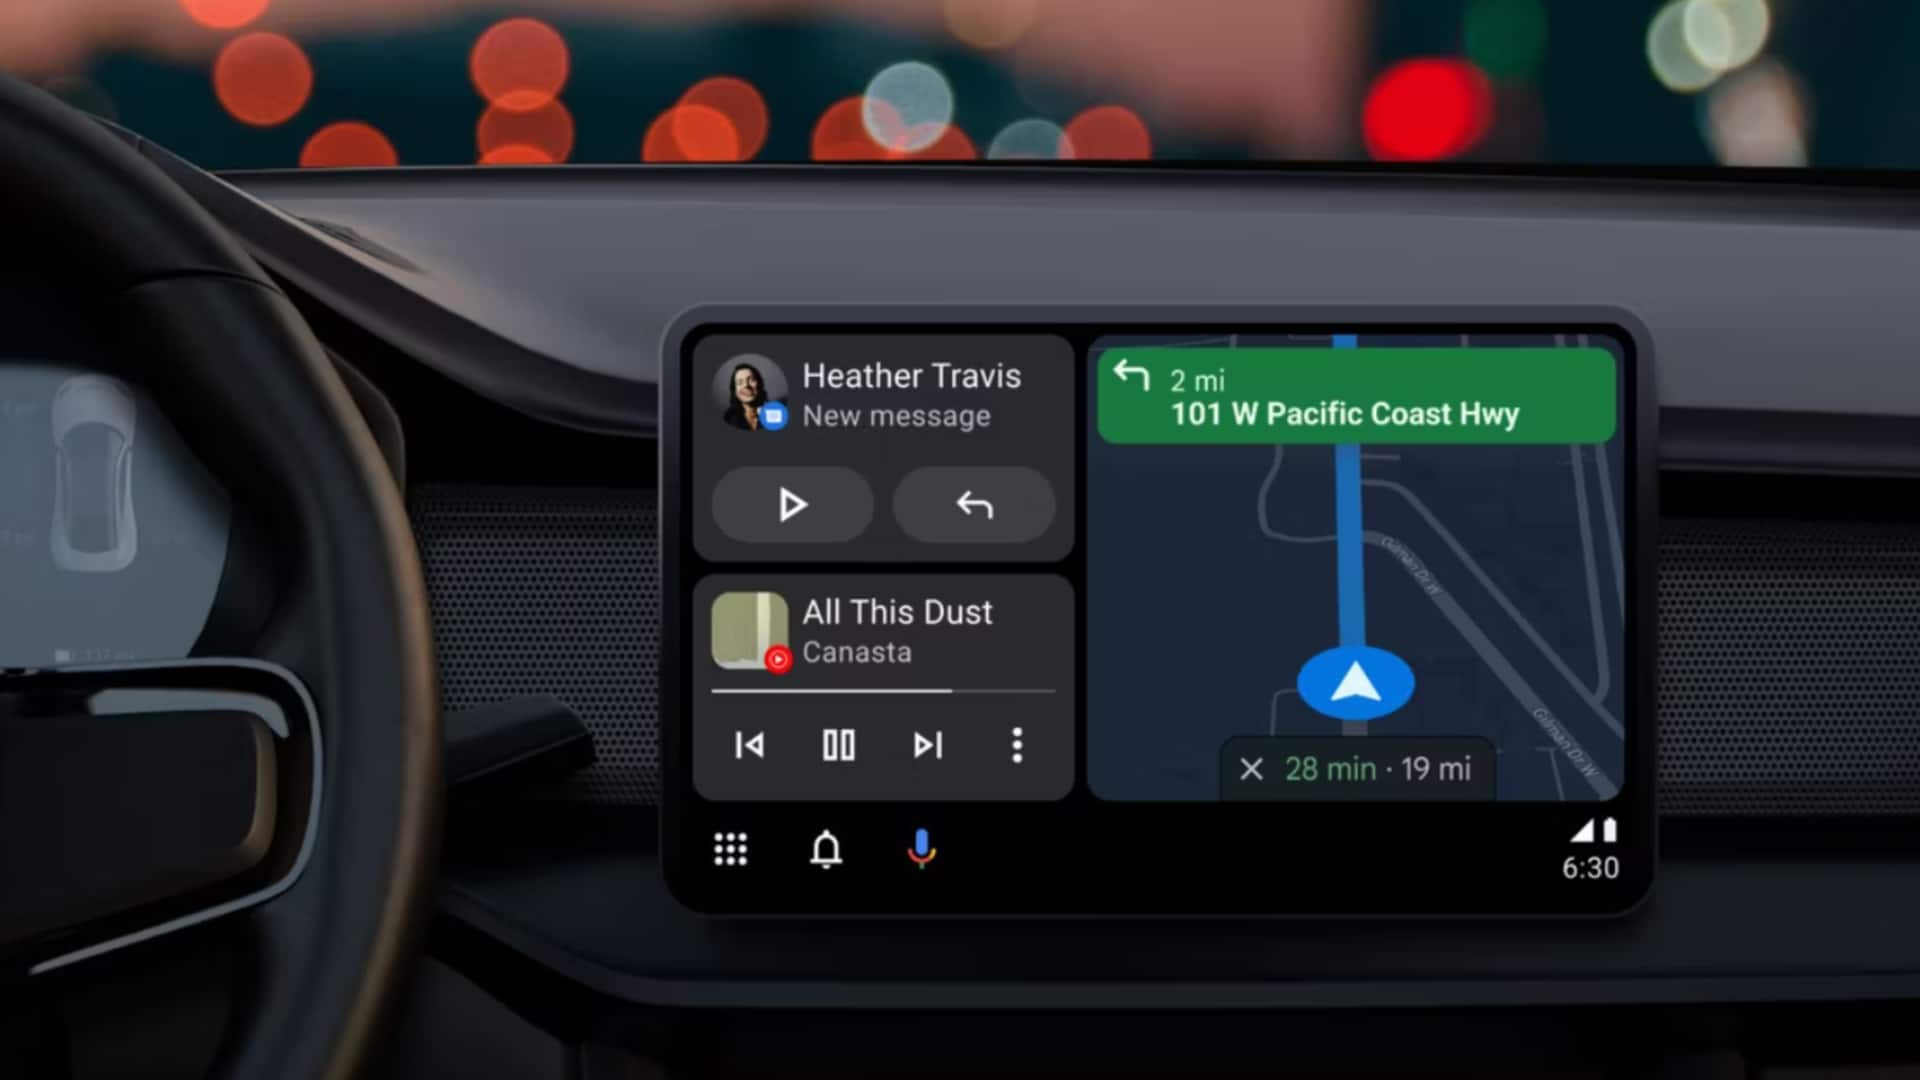 Android Auto explained: How to connect and use key features